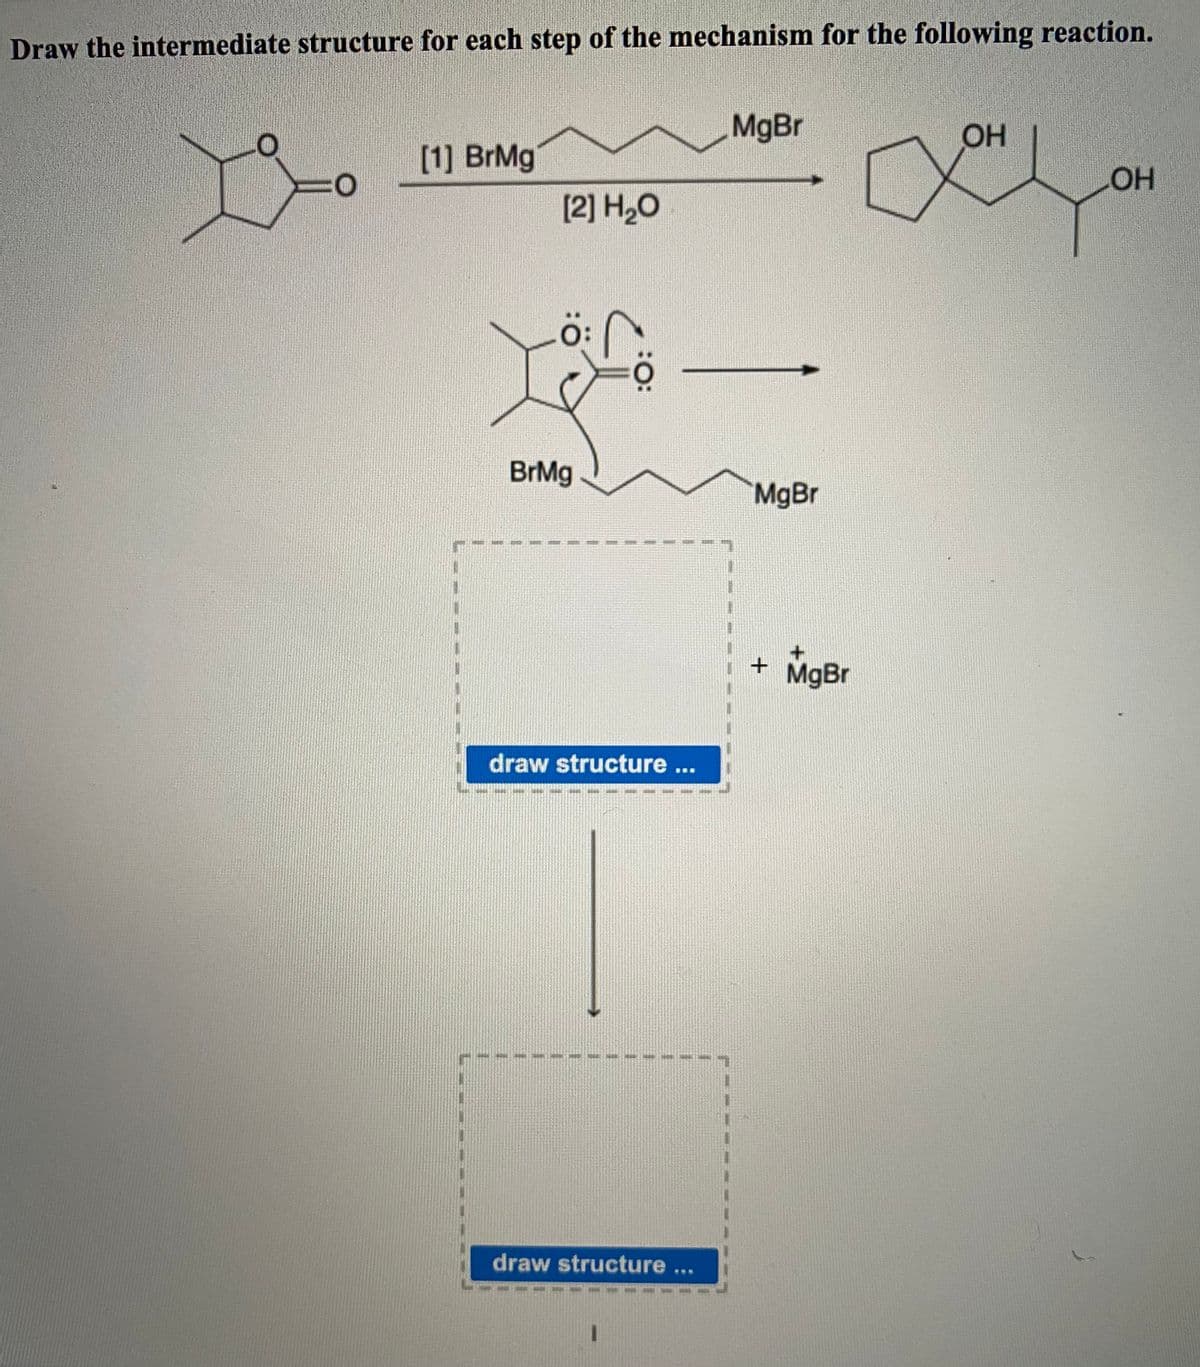 Draw the intermediate structure for each step of the mechanism for the following reaction.
MgBr
OH
[1] BrMg
[2] H,O
HO
BrMg
MgBr
+ MgBr
draw structure ...
draw structure ...
:
